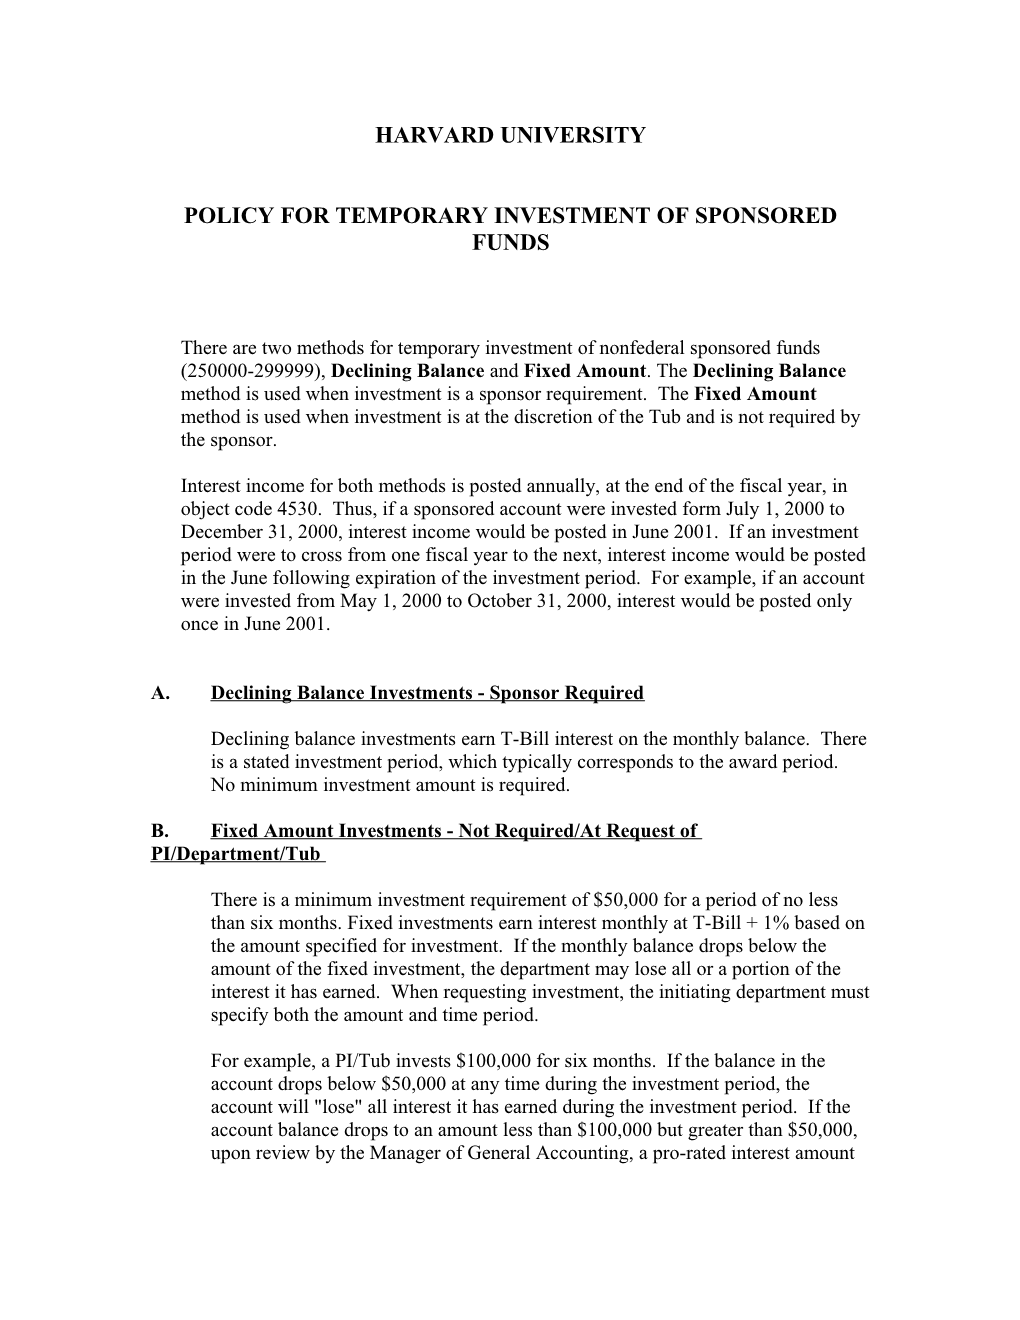 Policy for Temporary Investment of Sponsored Funds